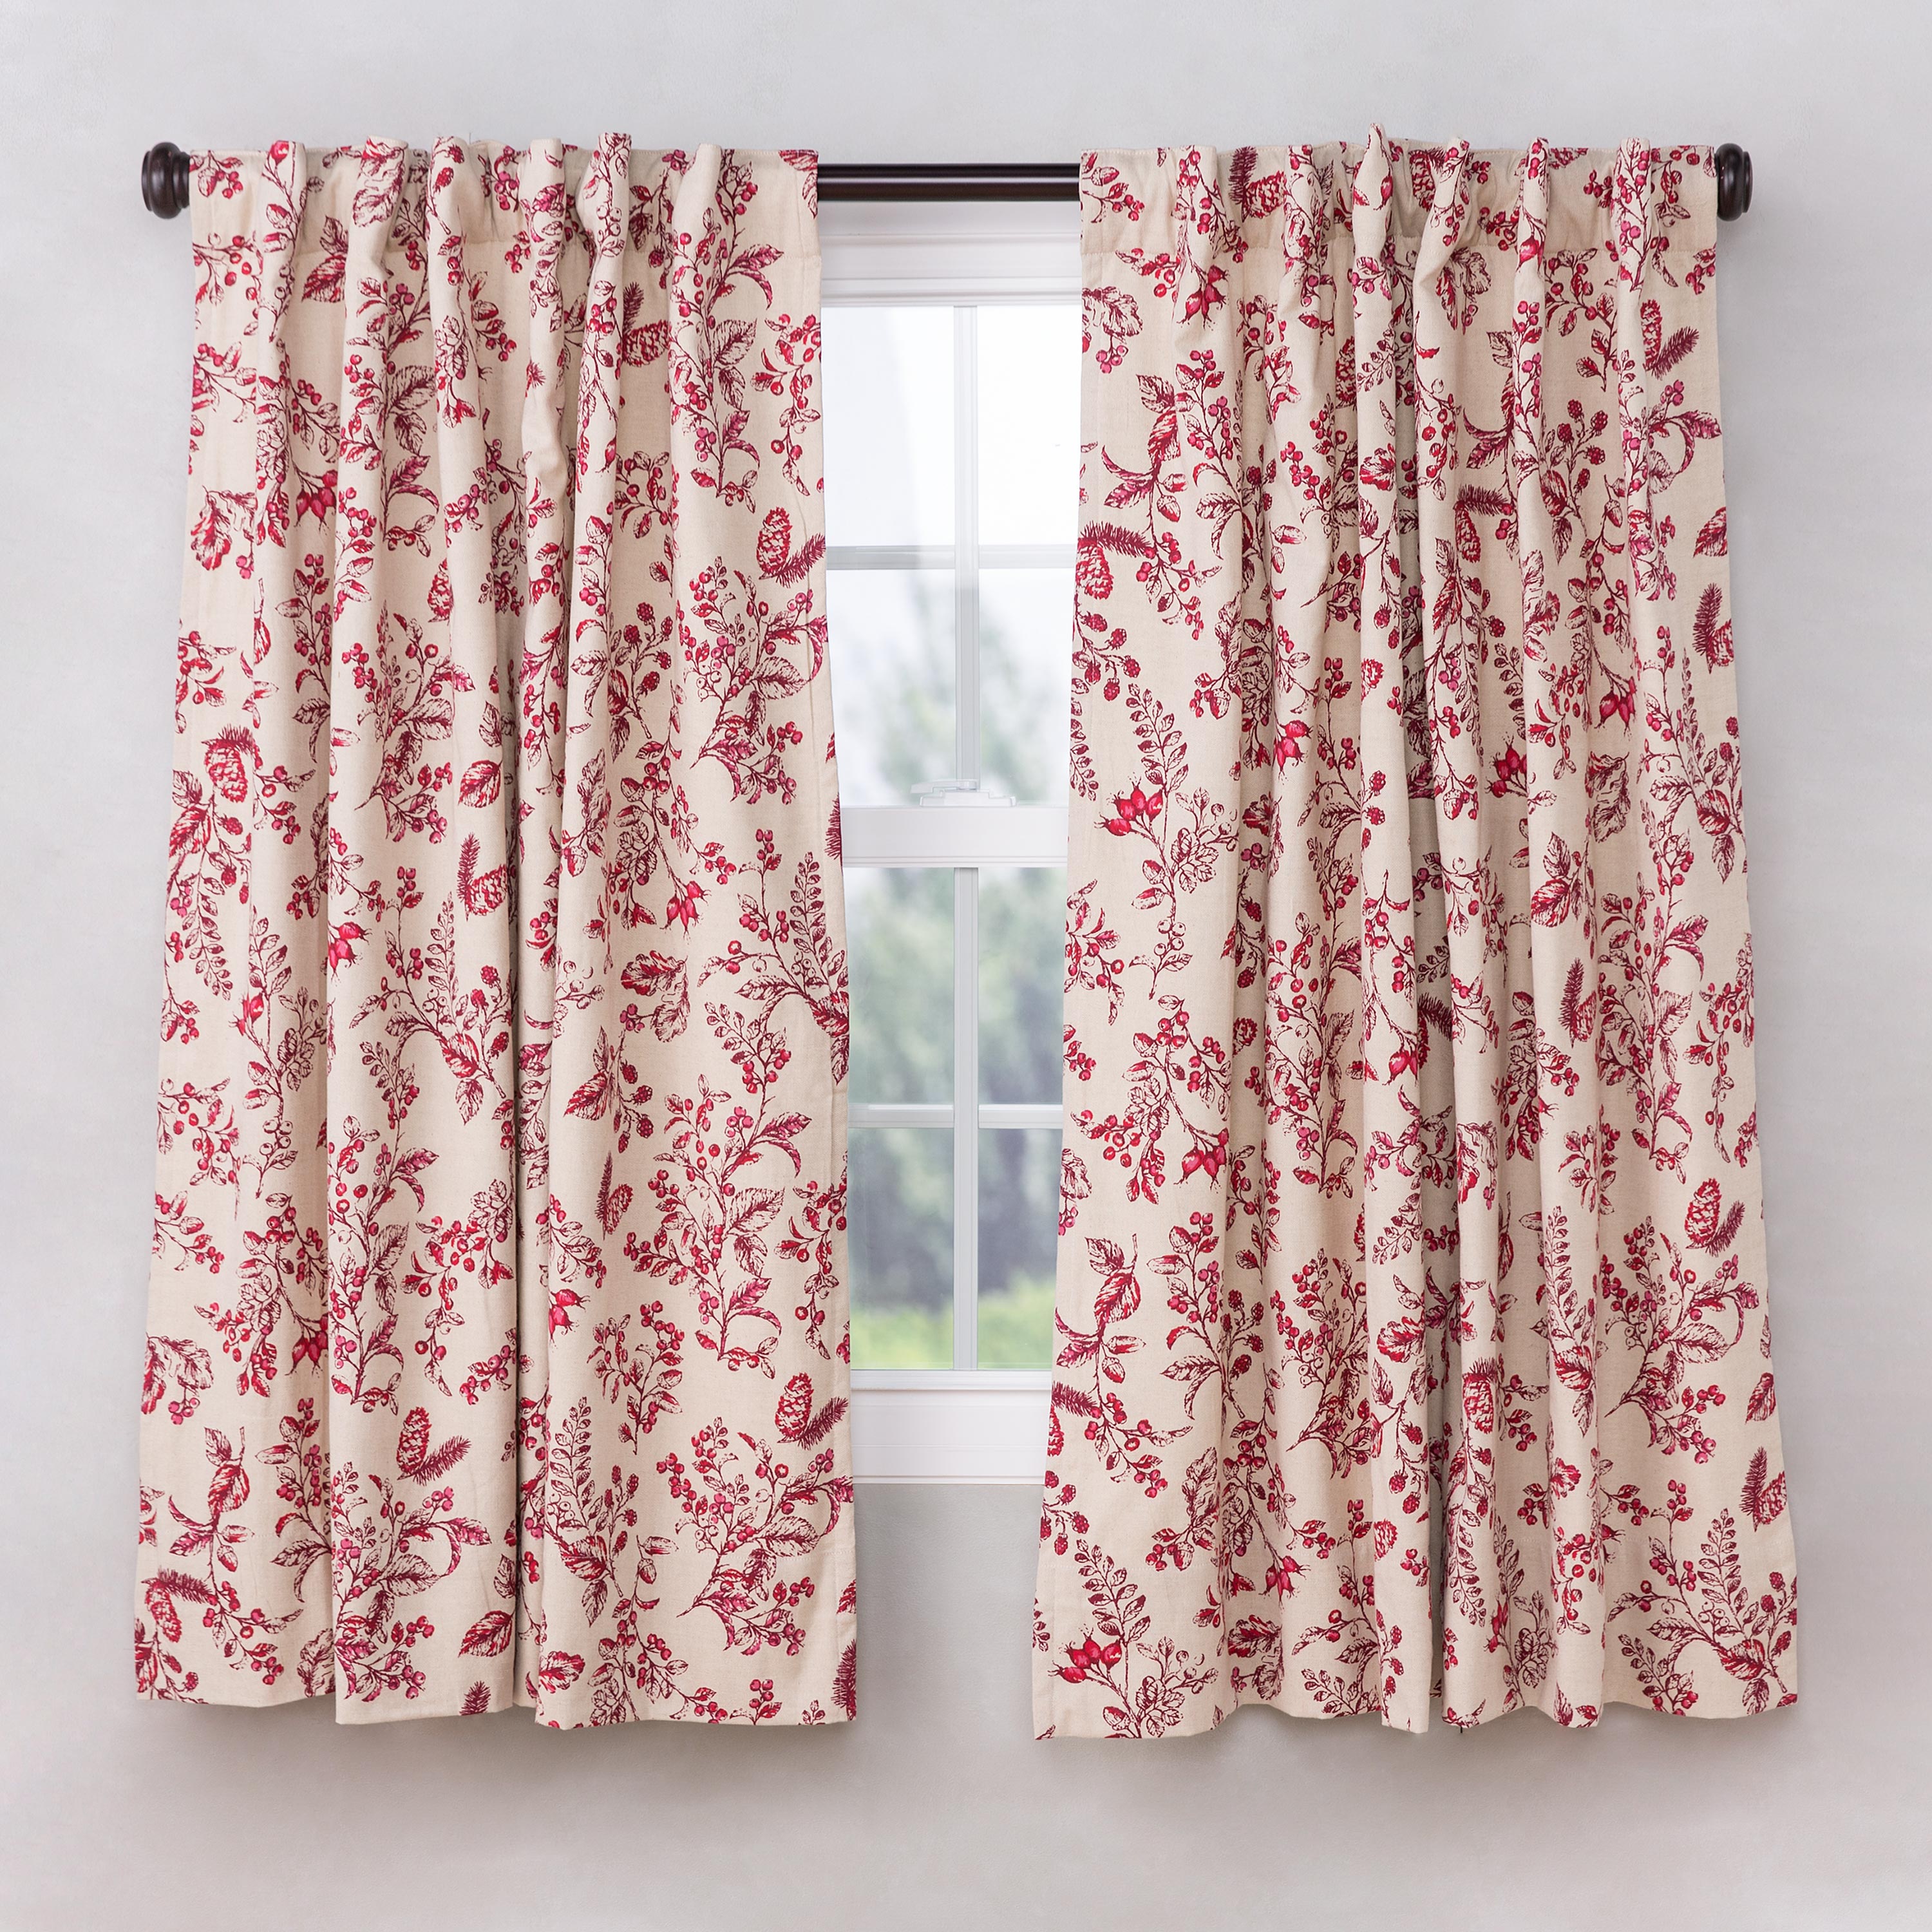 Botanical Toile Insulated Double-Lined Cotton Curtain Panel with Rod Pocket